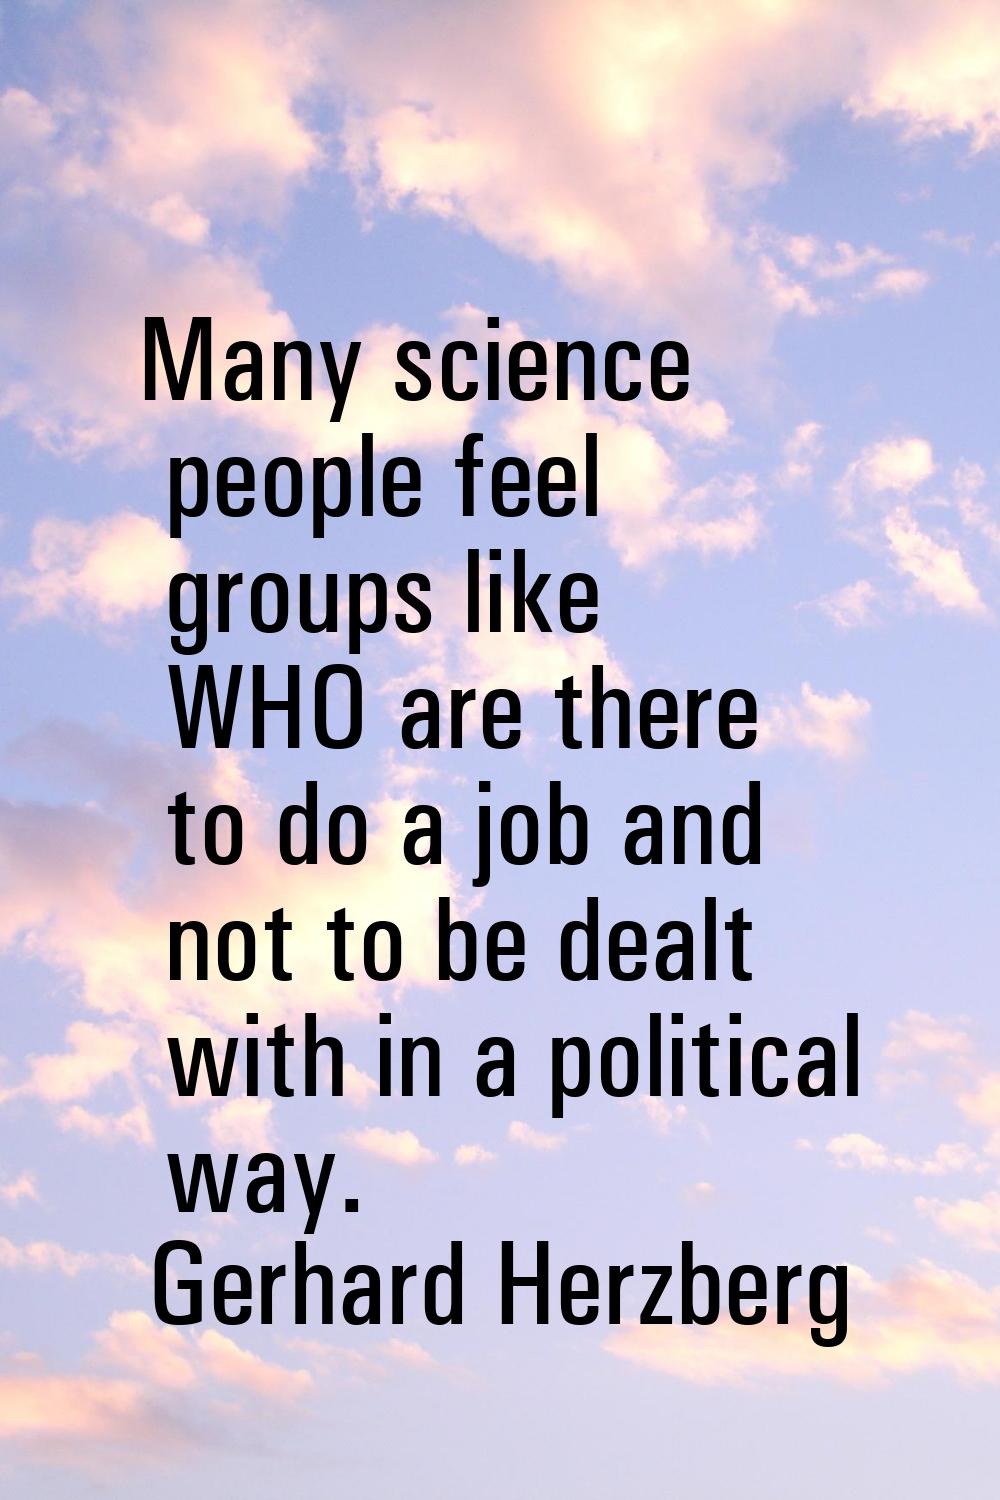 Many science people feel groups like WHO are there to do a job and not to be dealt with in a politi